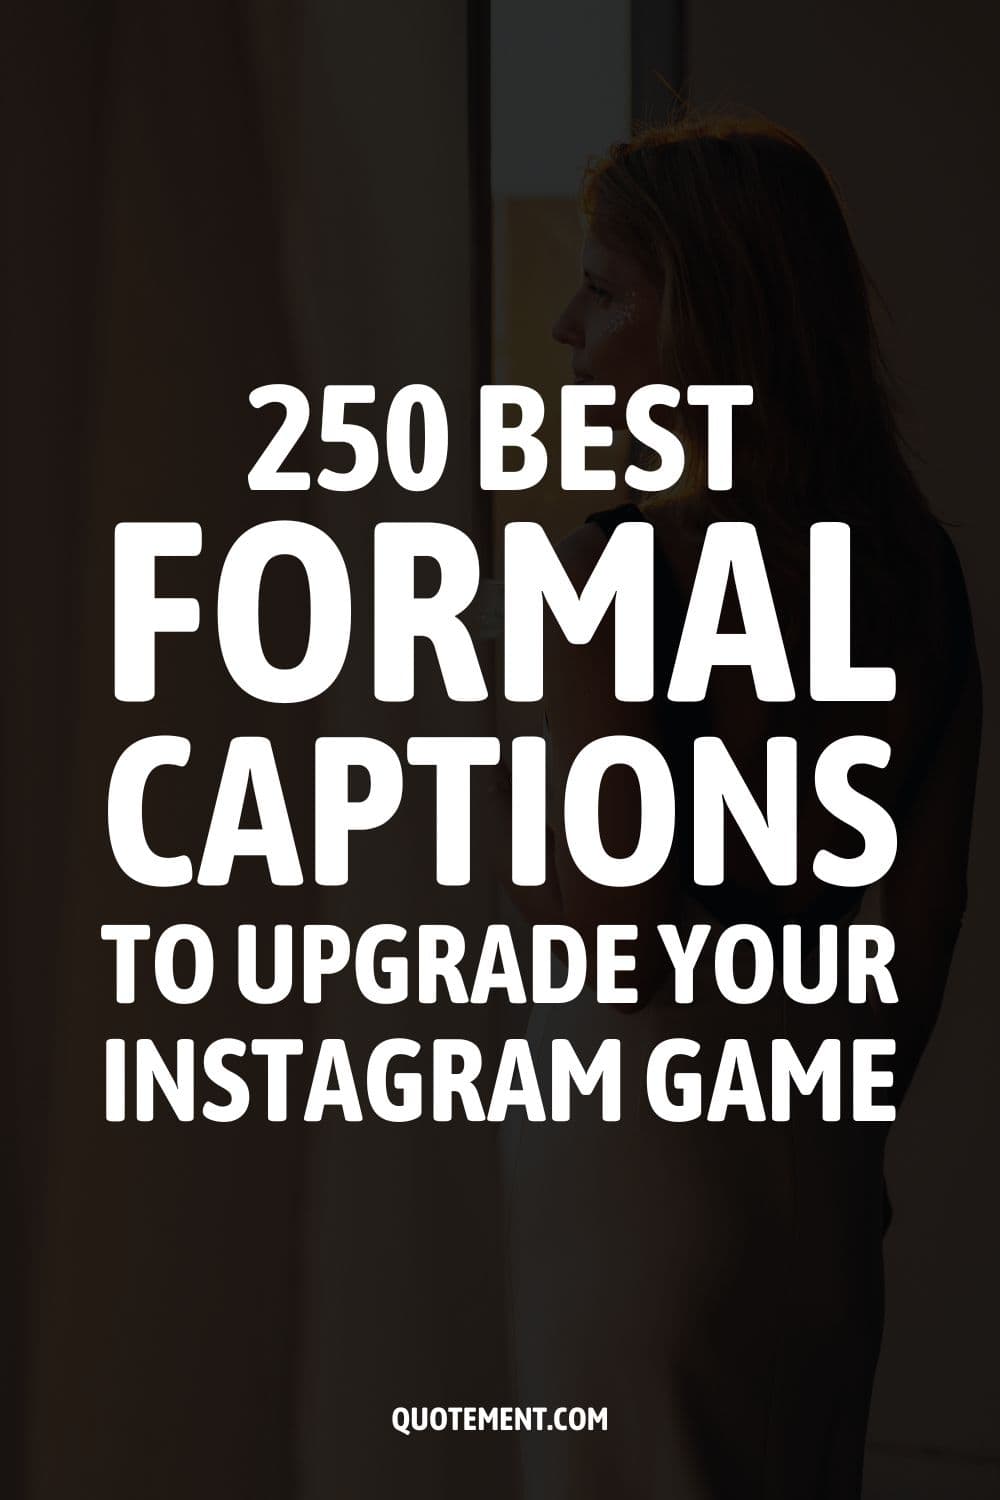 250 Best Formal Captions To Upgrade Your Instagram Game